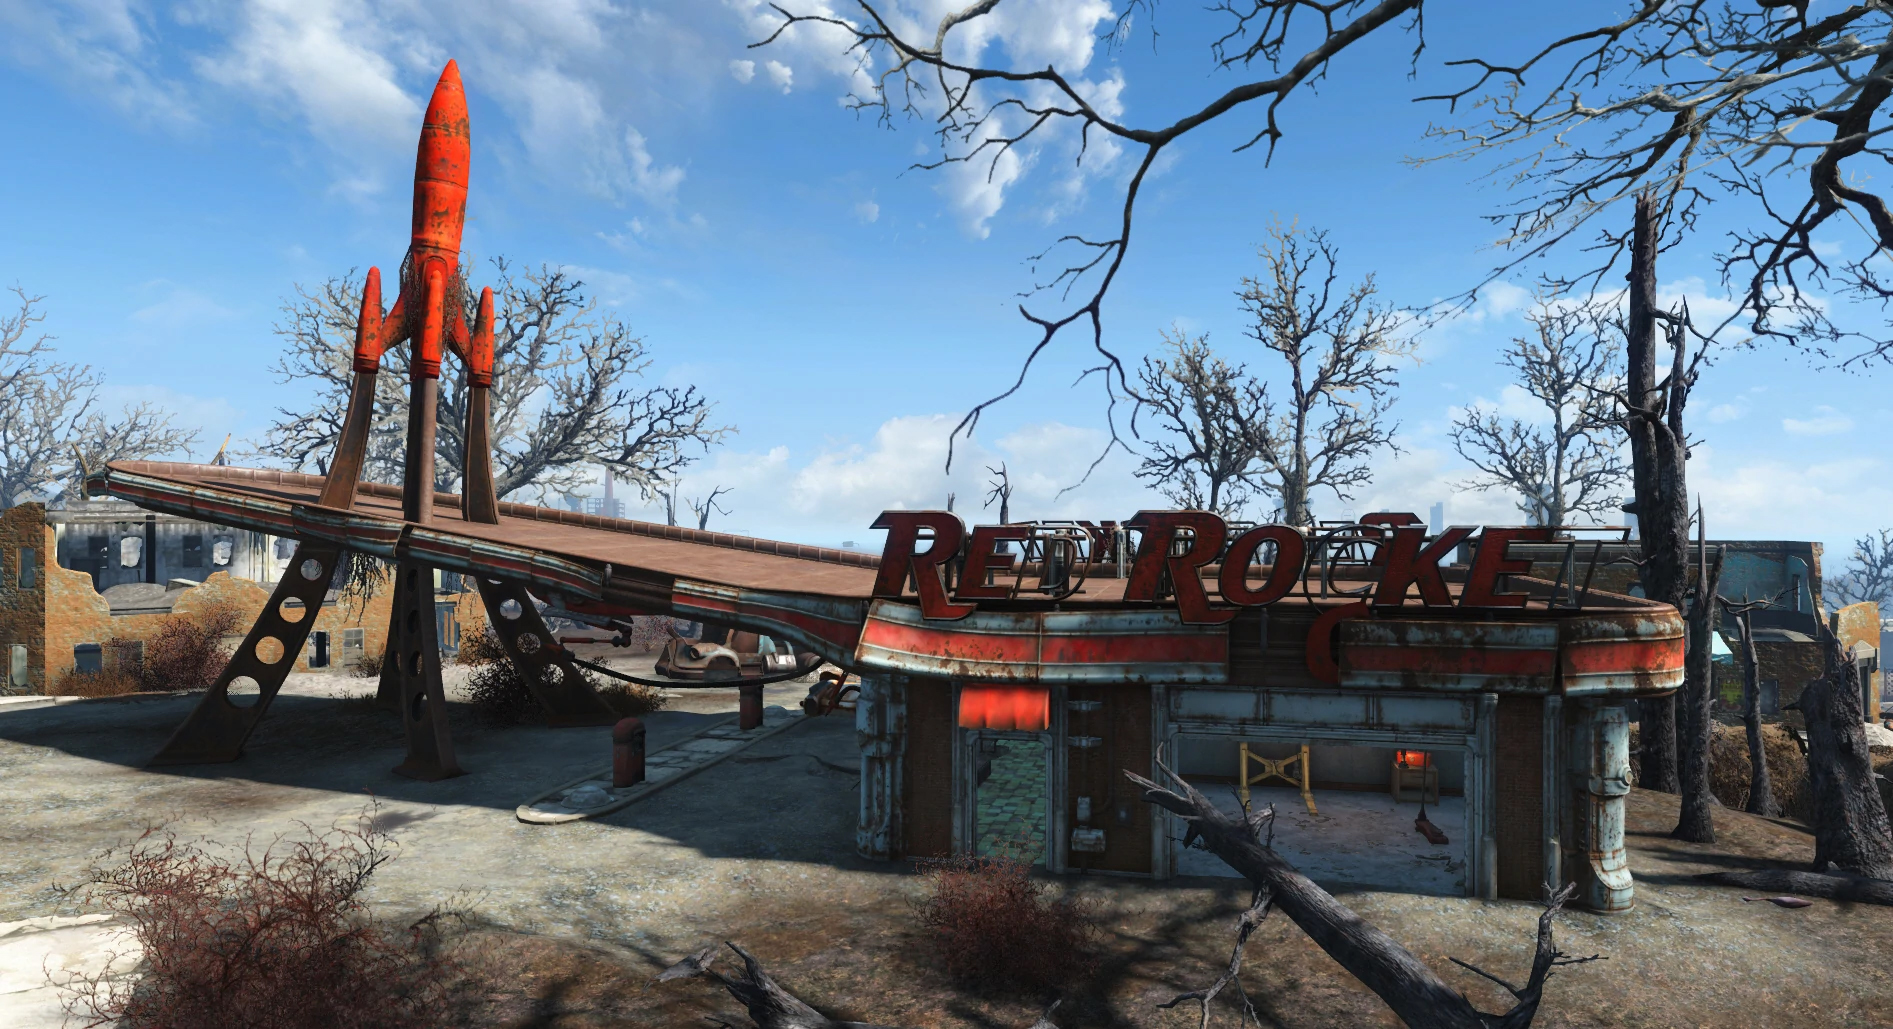 New Fallout TV series set photos show iconic Red Rocket gas station